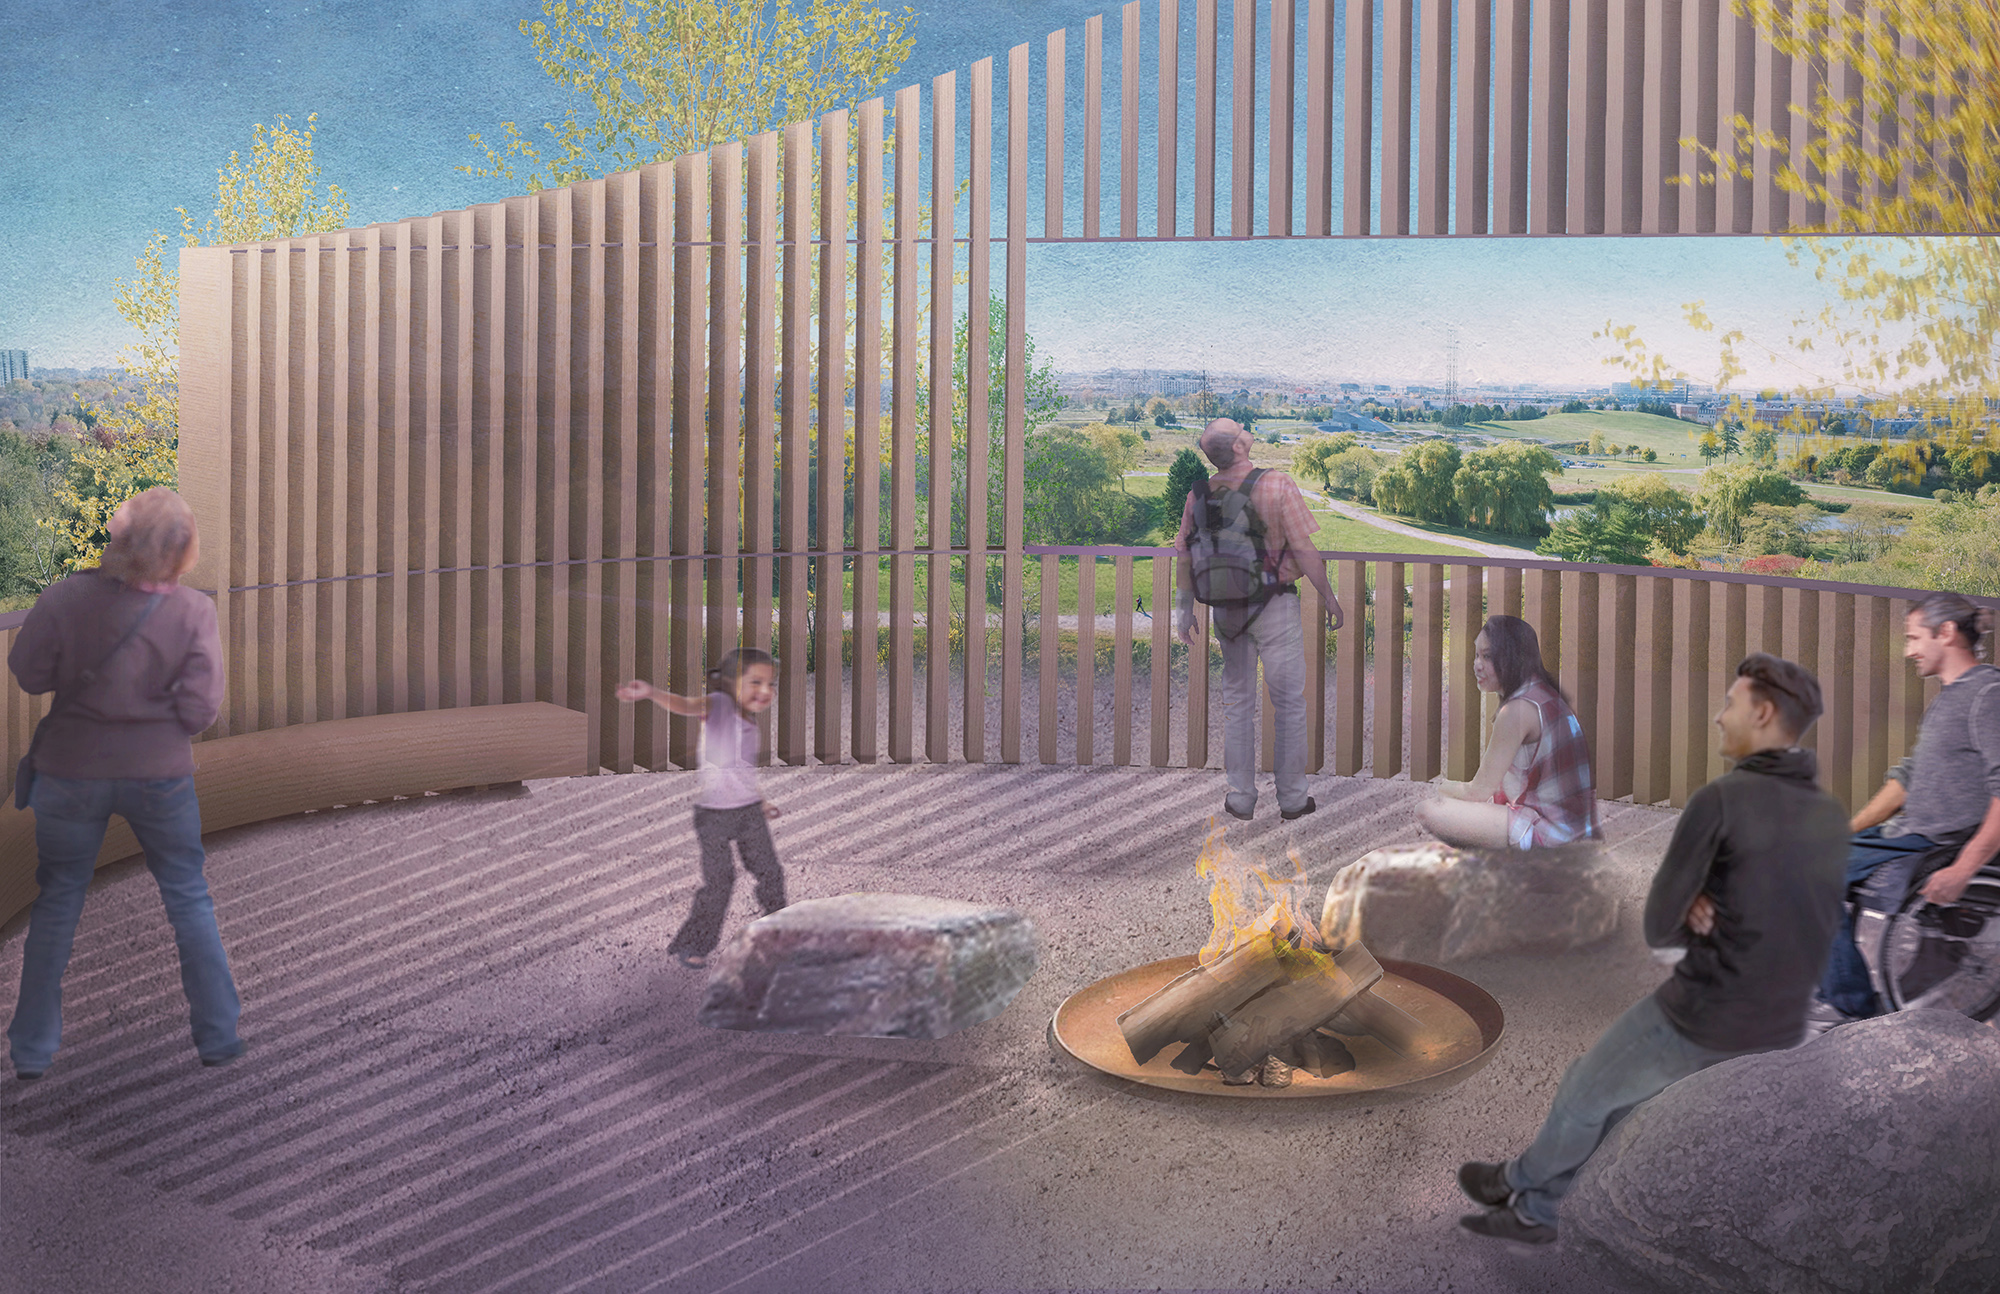 This view demonstrates what the art lookout at the top of the hill could look like. Show are a wooden slat structure providing shelter, a fire pit for ceremonies, integrated seating and boulders.